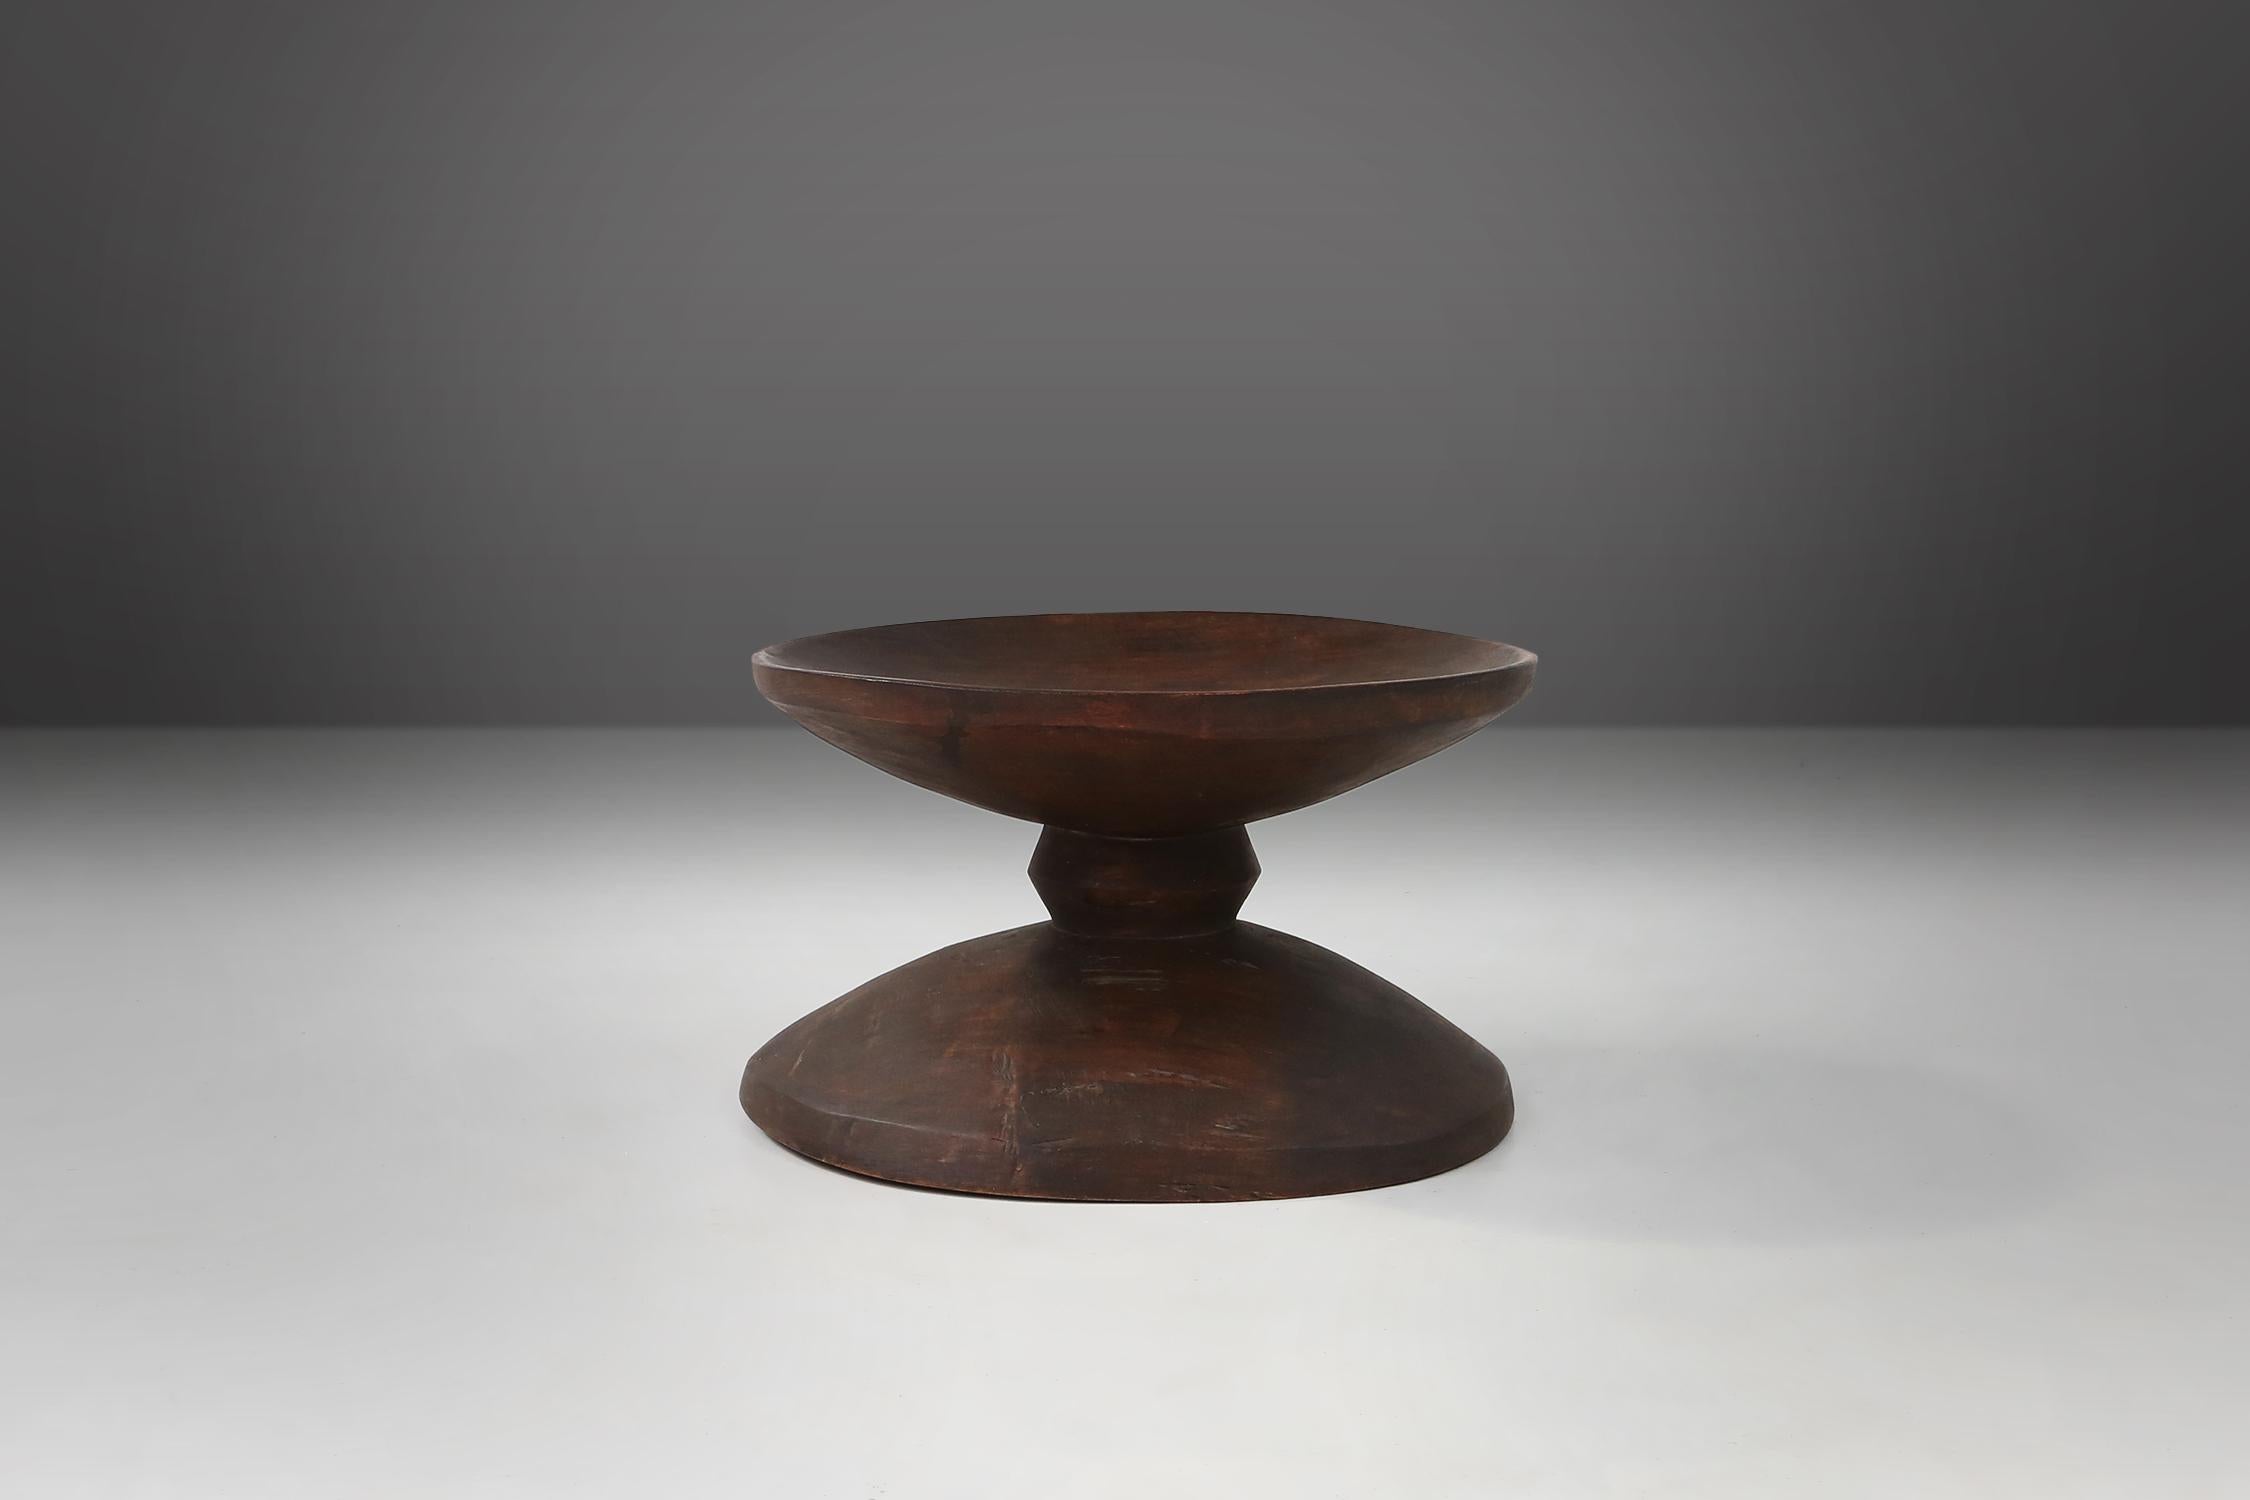 1950 / African tree trunk bowl / Mid-century / vintage / design

This eye-catching large African oak bowl was crafted around 1950. Hand carved from a solid tree trunk, this bowl is one-of-a-kind with its own distinct characteristics and natural